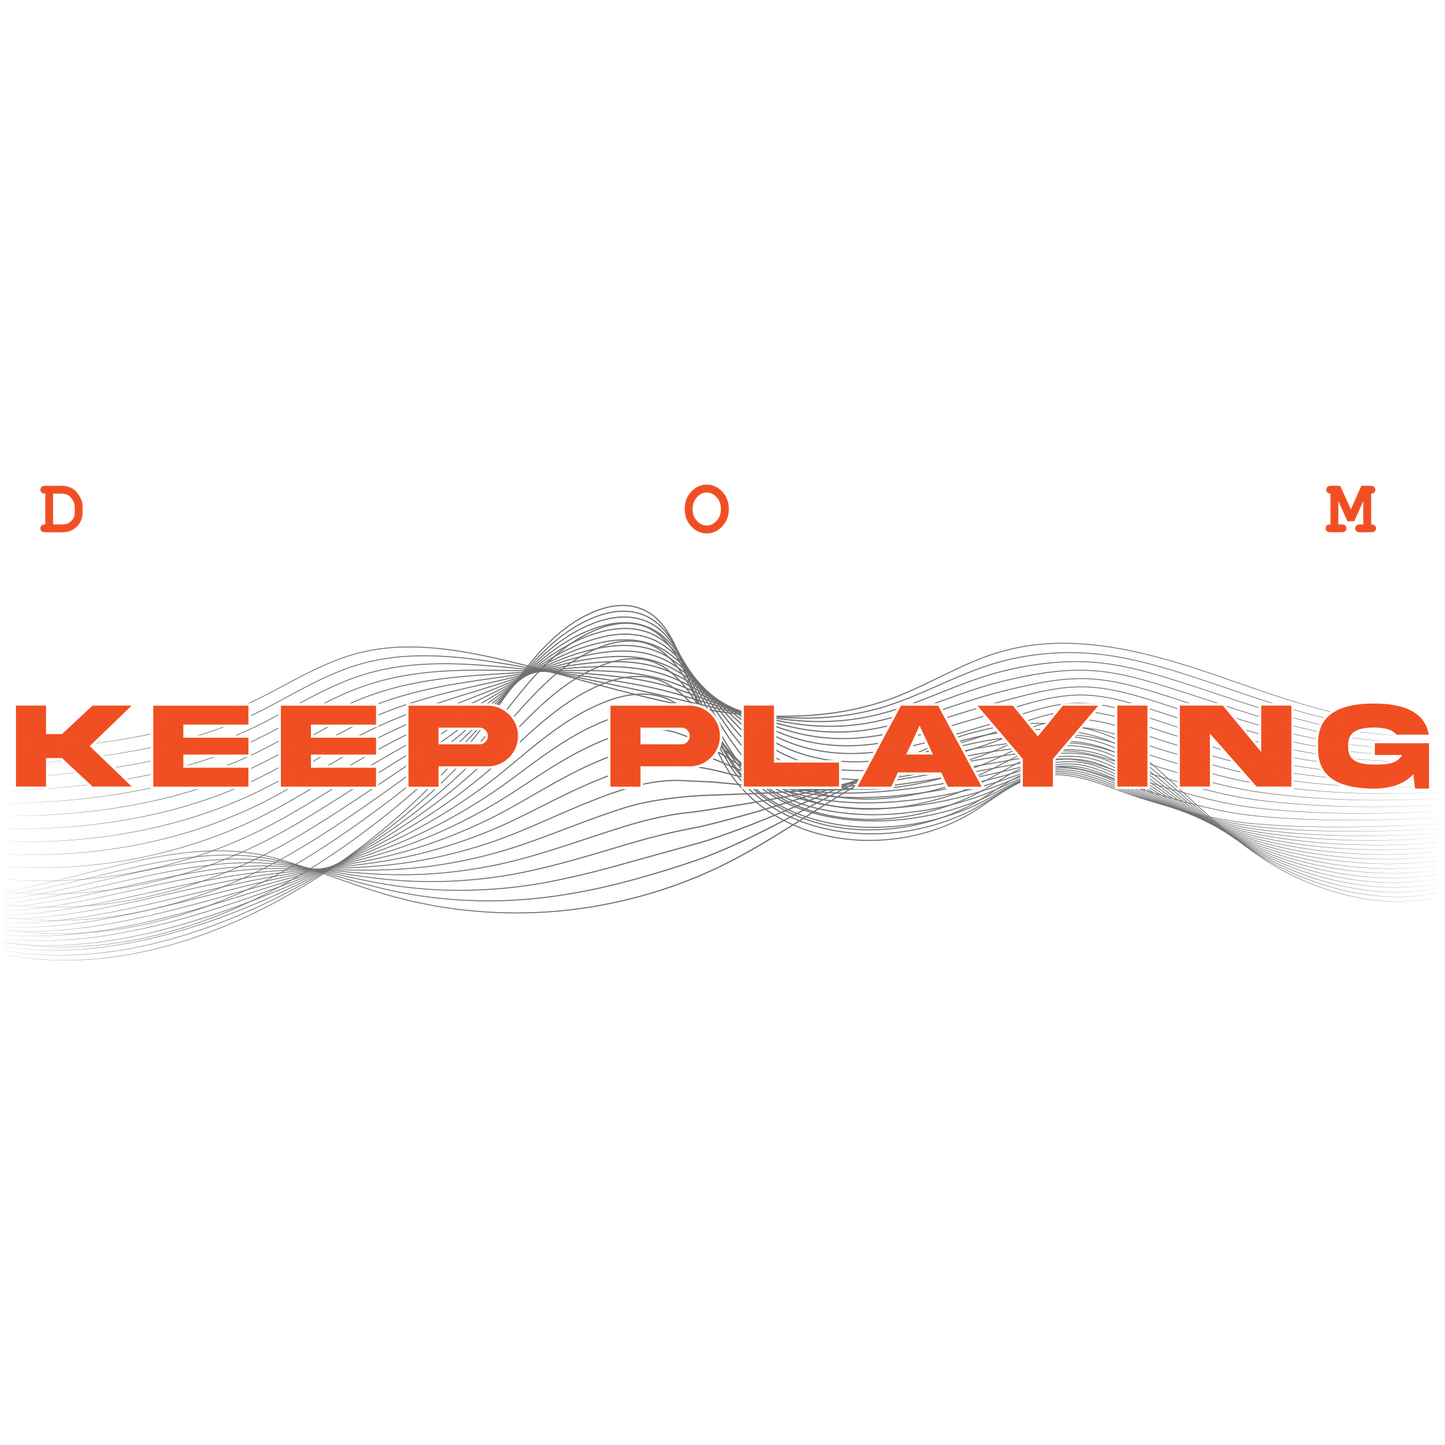 KEEP PLAYING DOM T-SHIRT